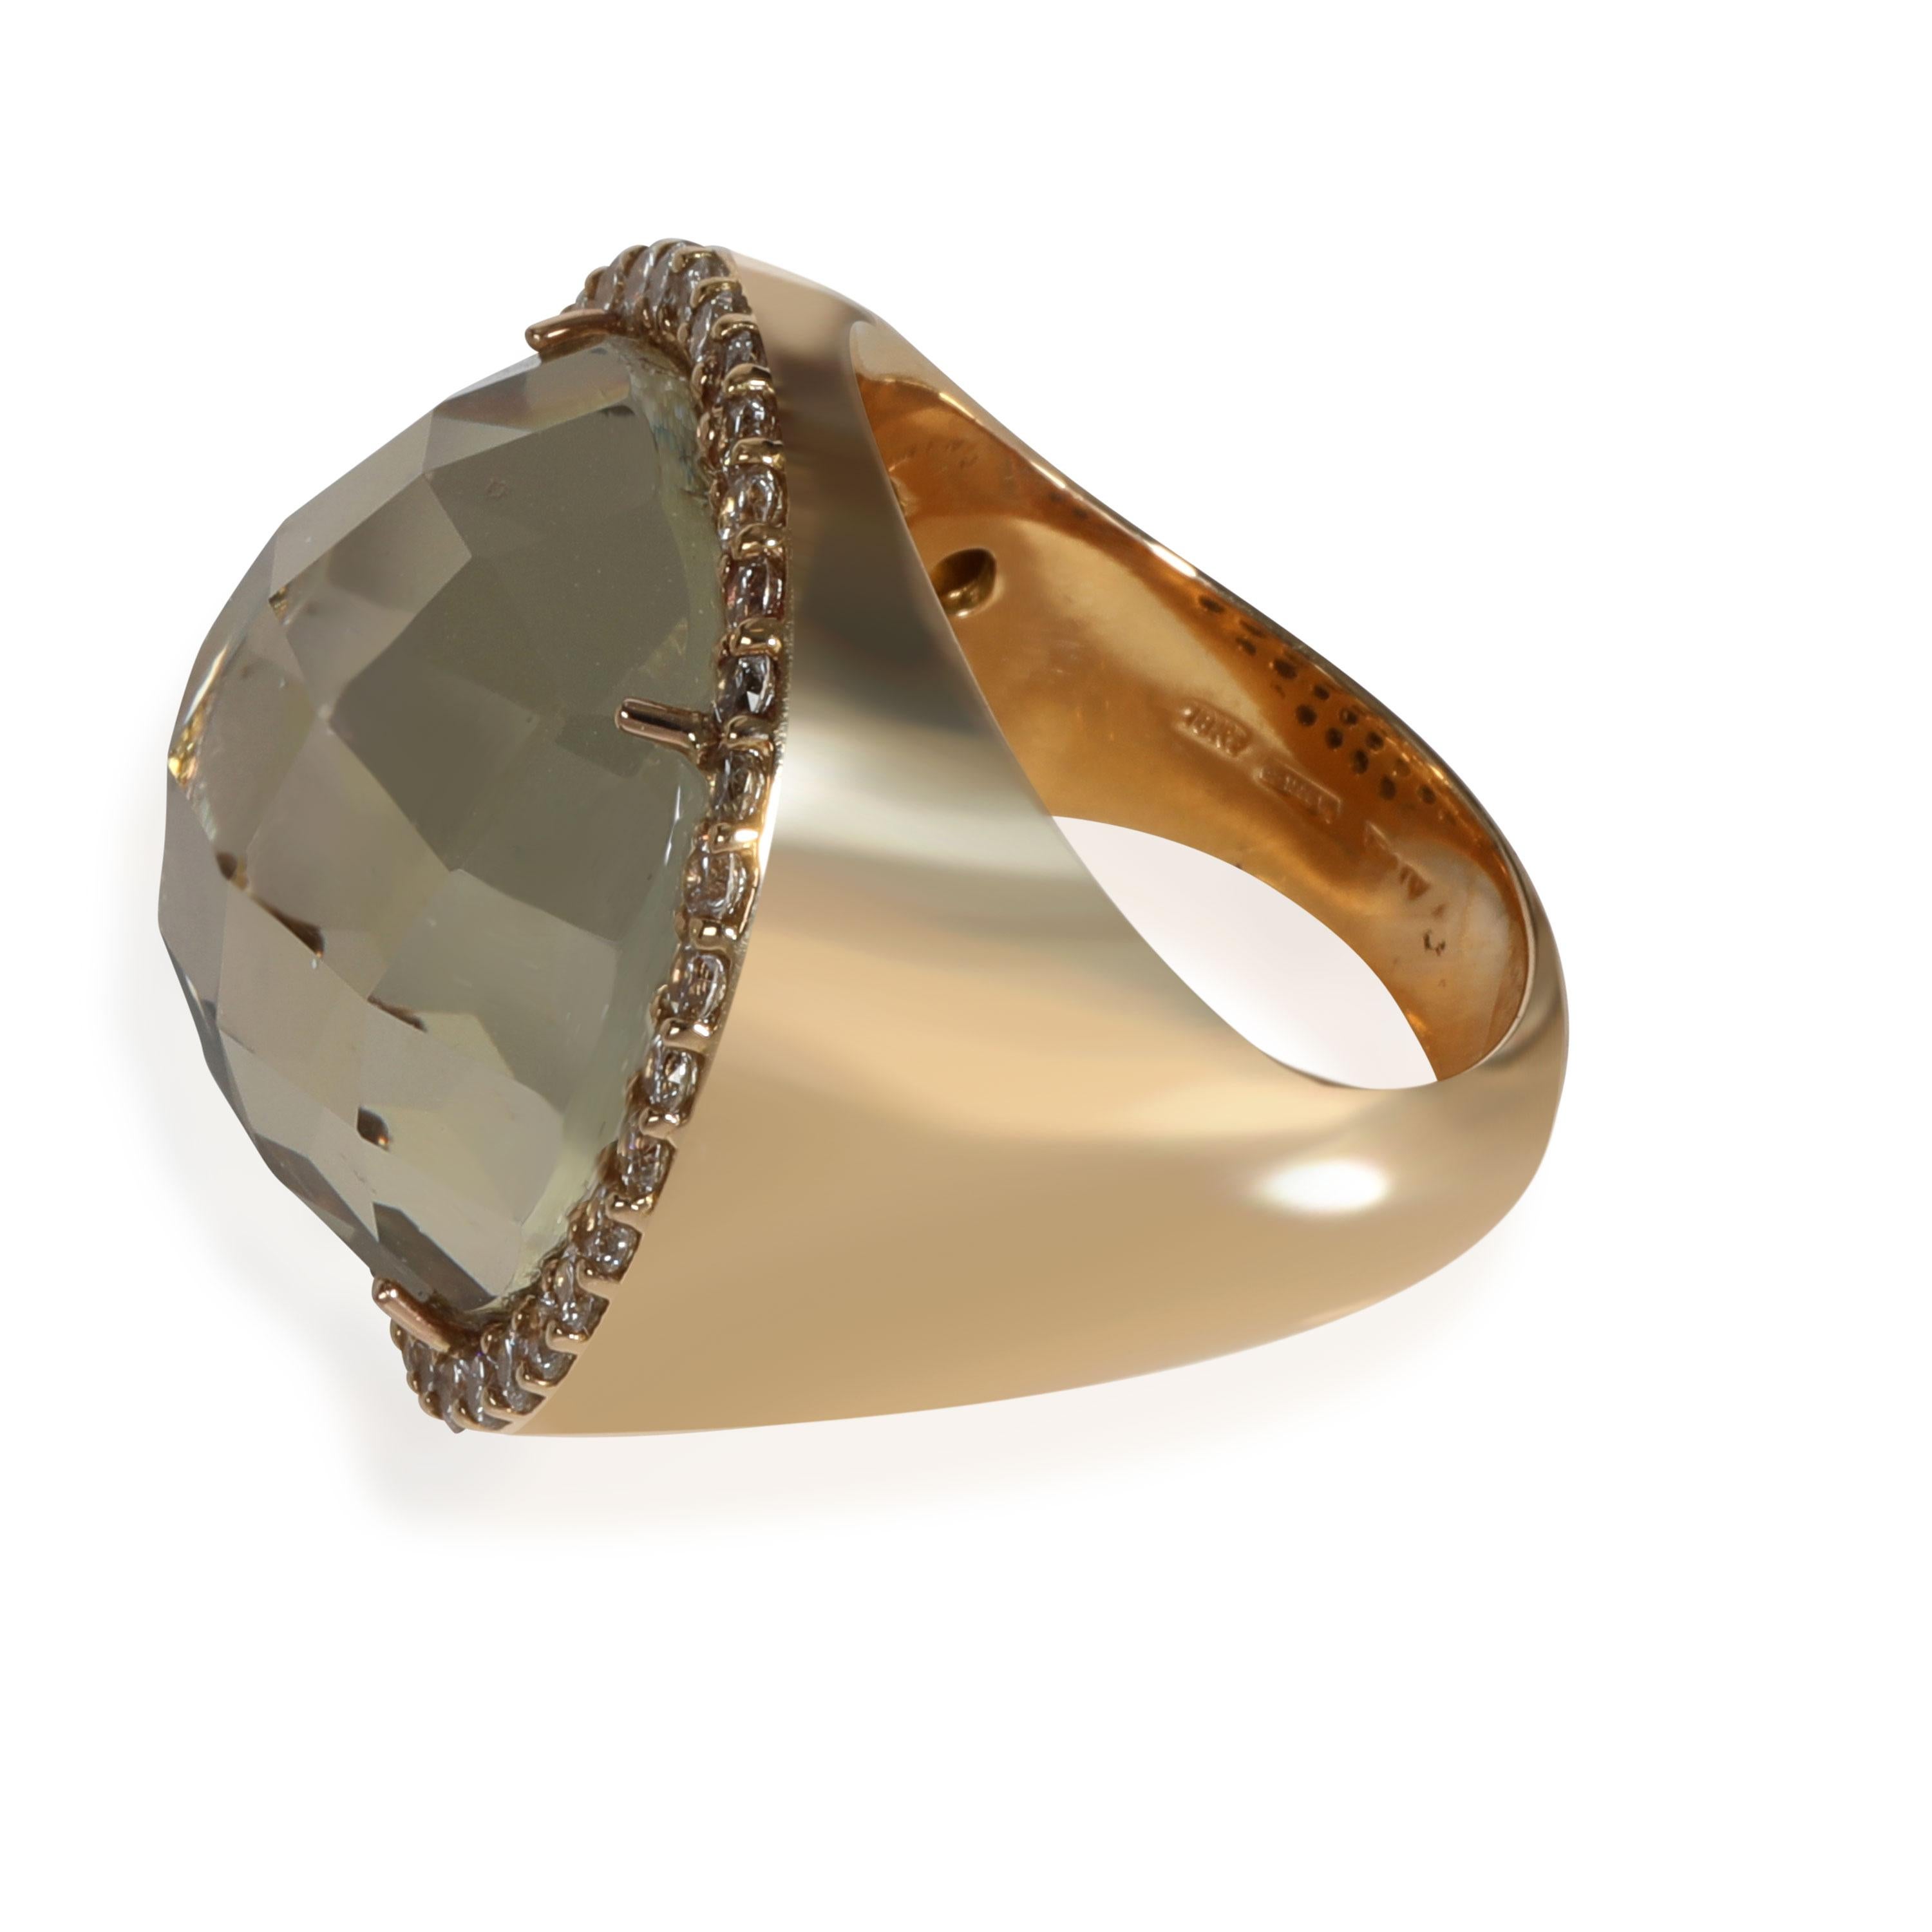 Roberto Coin Quartz Diamond Doublet Ring in 18K Yellow Gold 0.95 Ctw In Excellent Condition For Sale In New York, NY